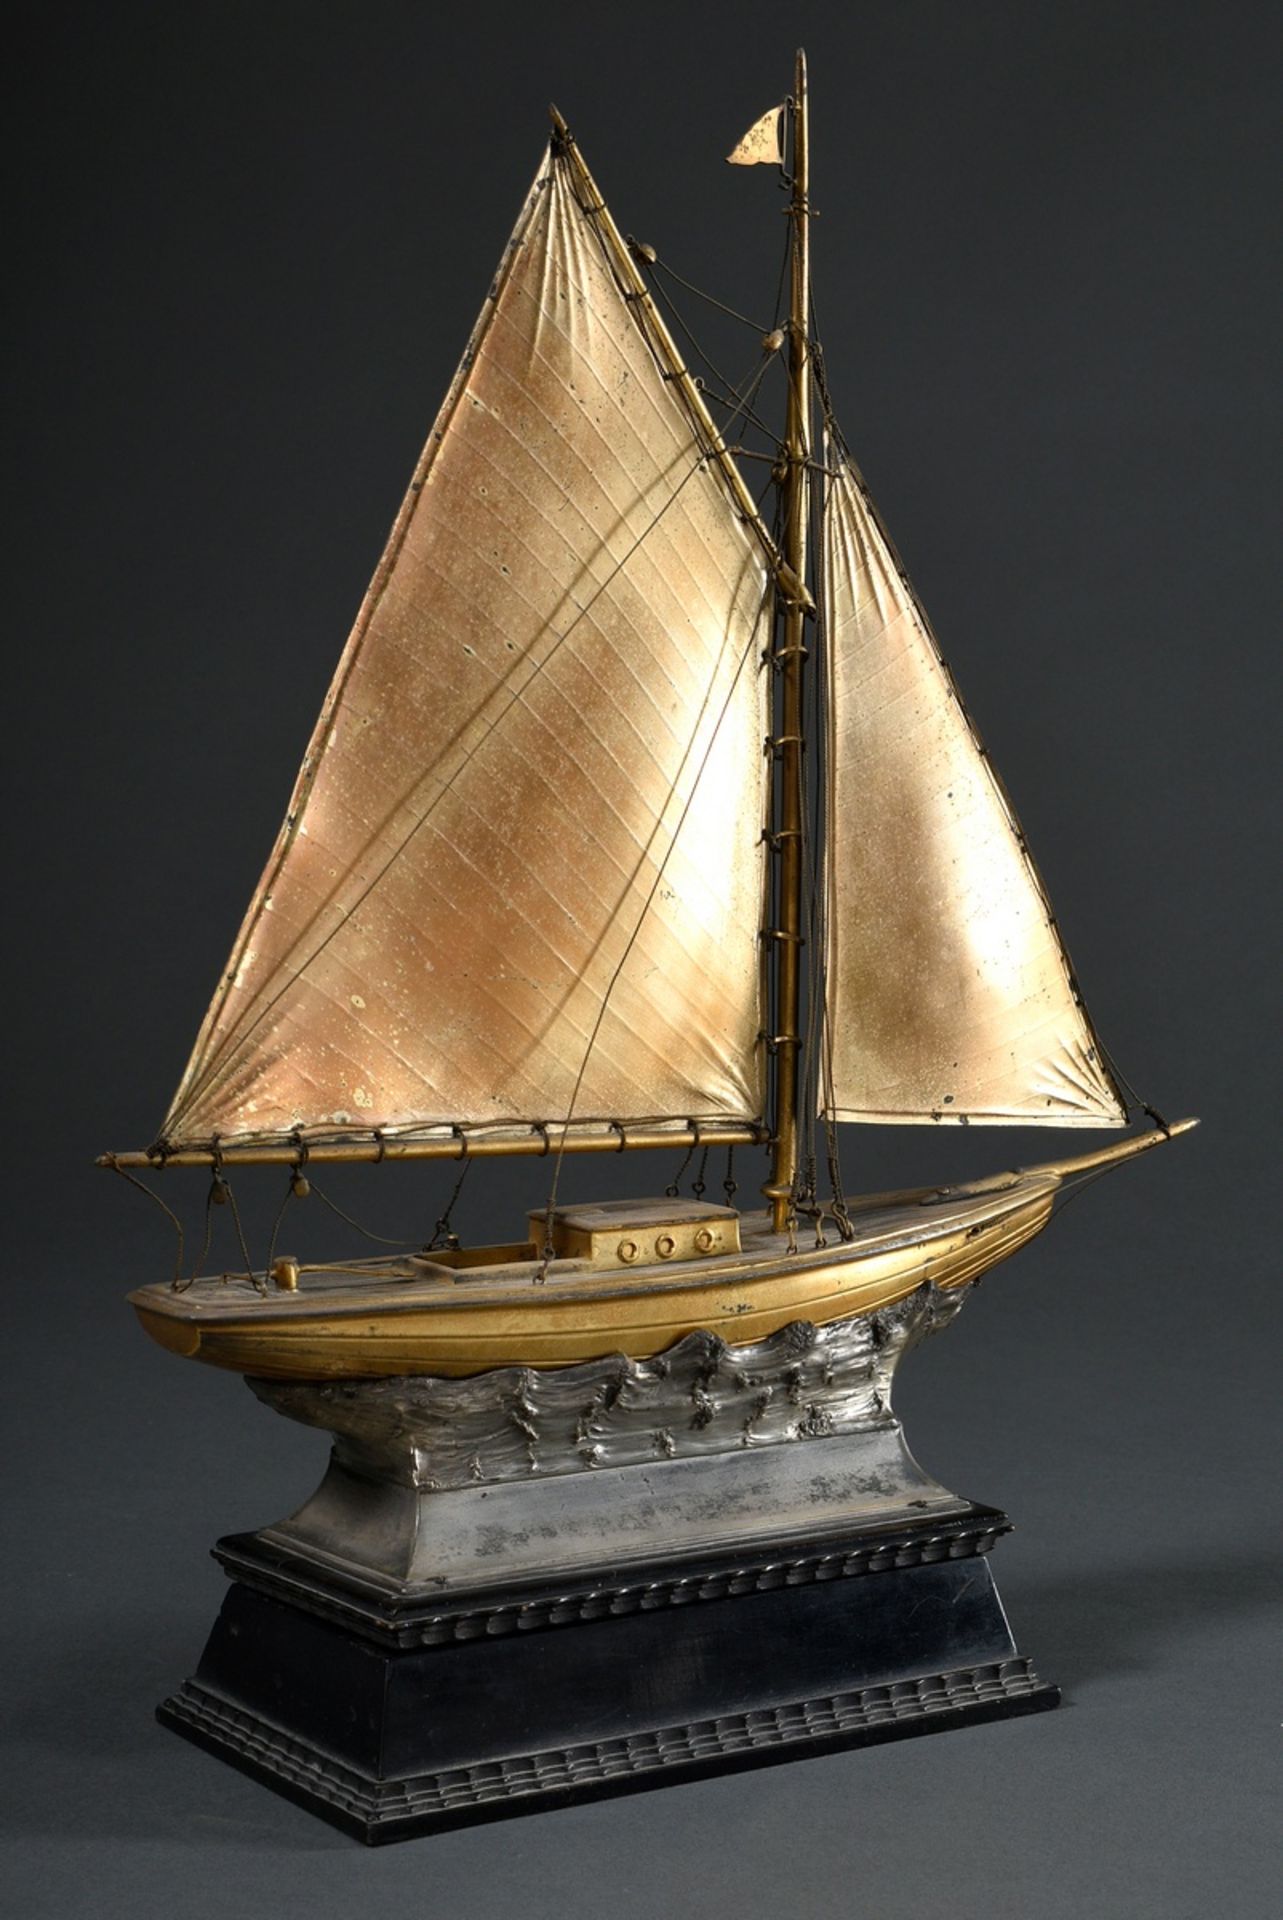 Model ship sailing price "Yacht", wood/metal, galvanised, on metal stand with sculptural waves and  - Image 2 of 9